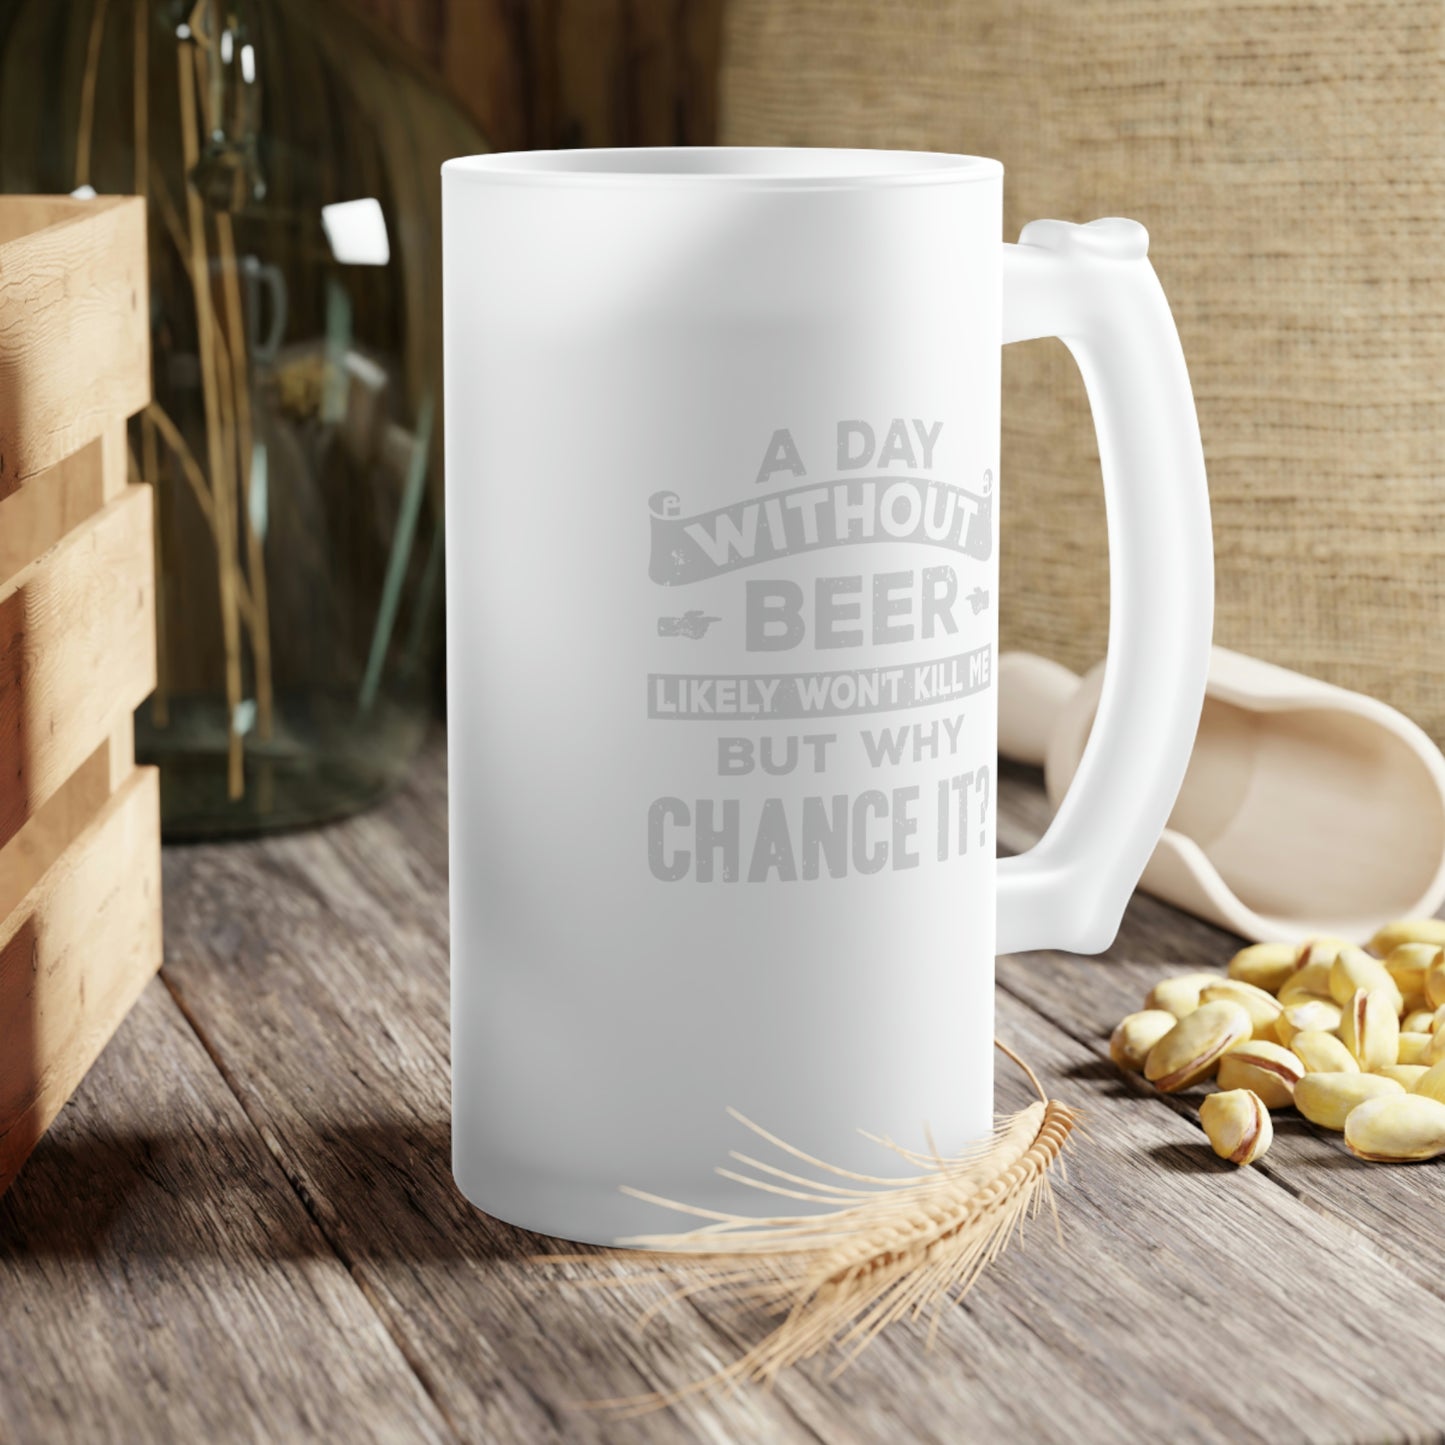 A Day Without Beer Won't Kill Me But Why Chance It 16 oz. Frosted Glass Beer Mug